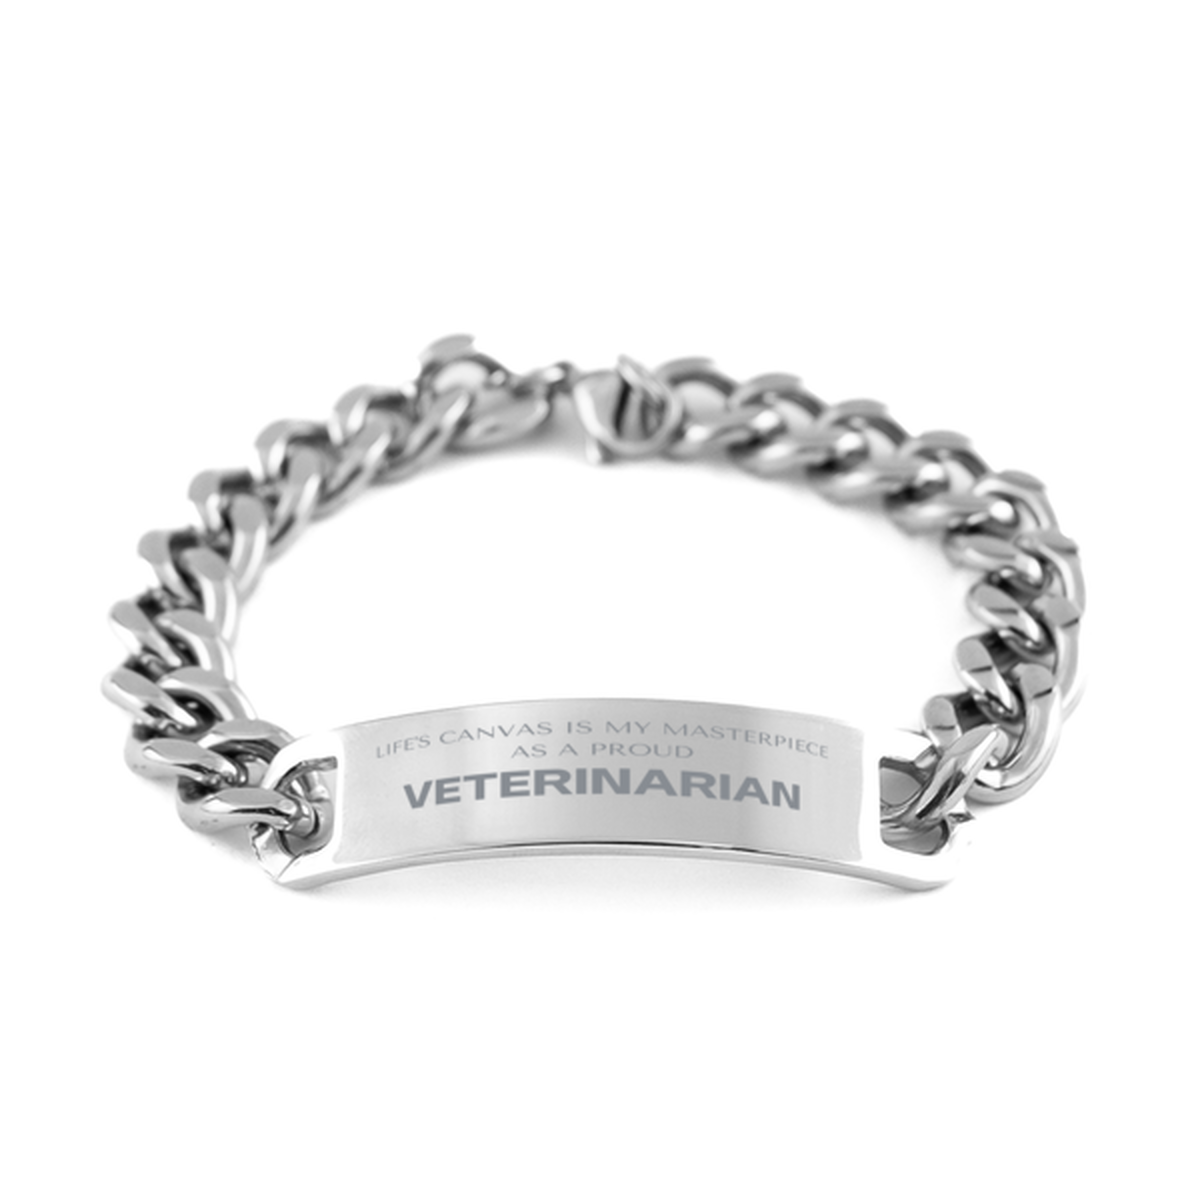 Proud Veterinarian Gifts, Life's canvas is my masterpiece, Epic Birthday Christmas Unique Cuban Chain Stainless Steel Bracelet For Veterinarian, Coworkers, Men, Women, Friends